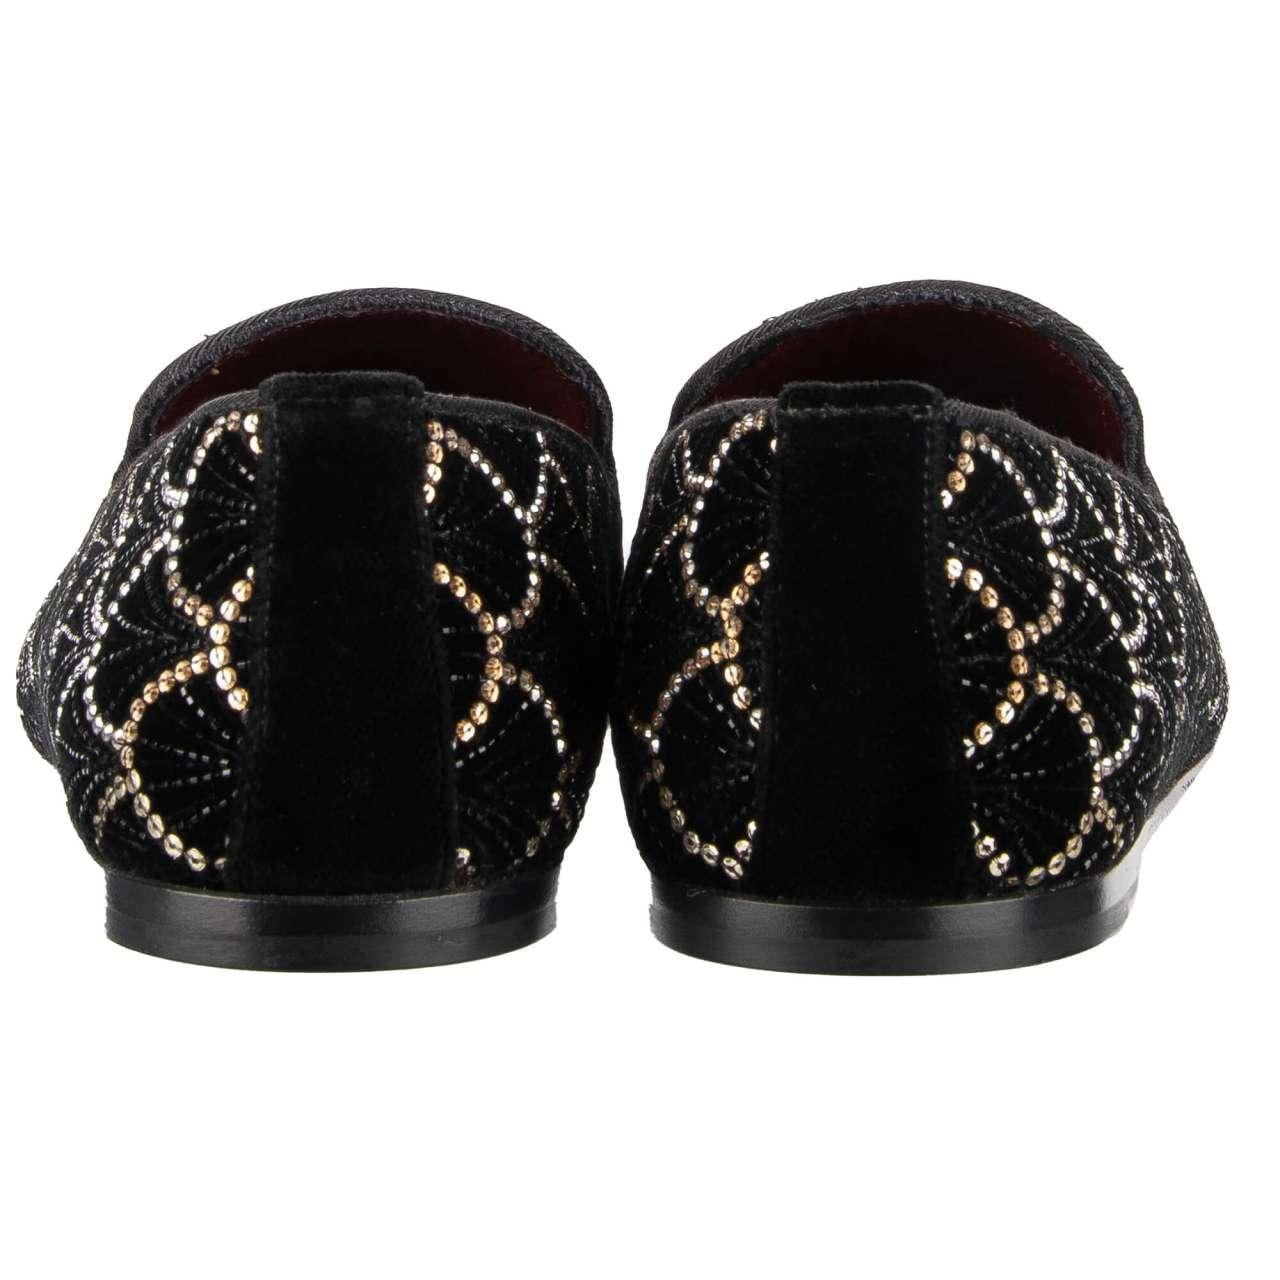 Dolce & Gabbana Crystals Embroidered Loafer Shoes ISPICA Black Gold EUR 42 For Sale 2